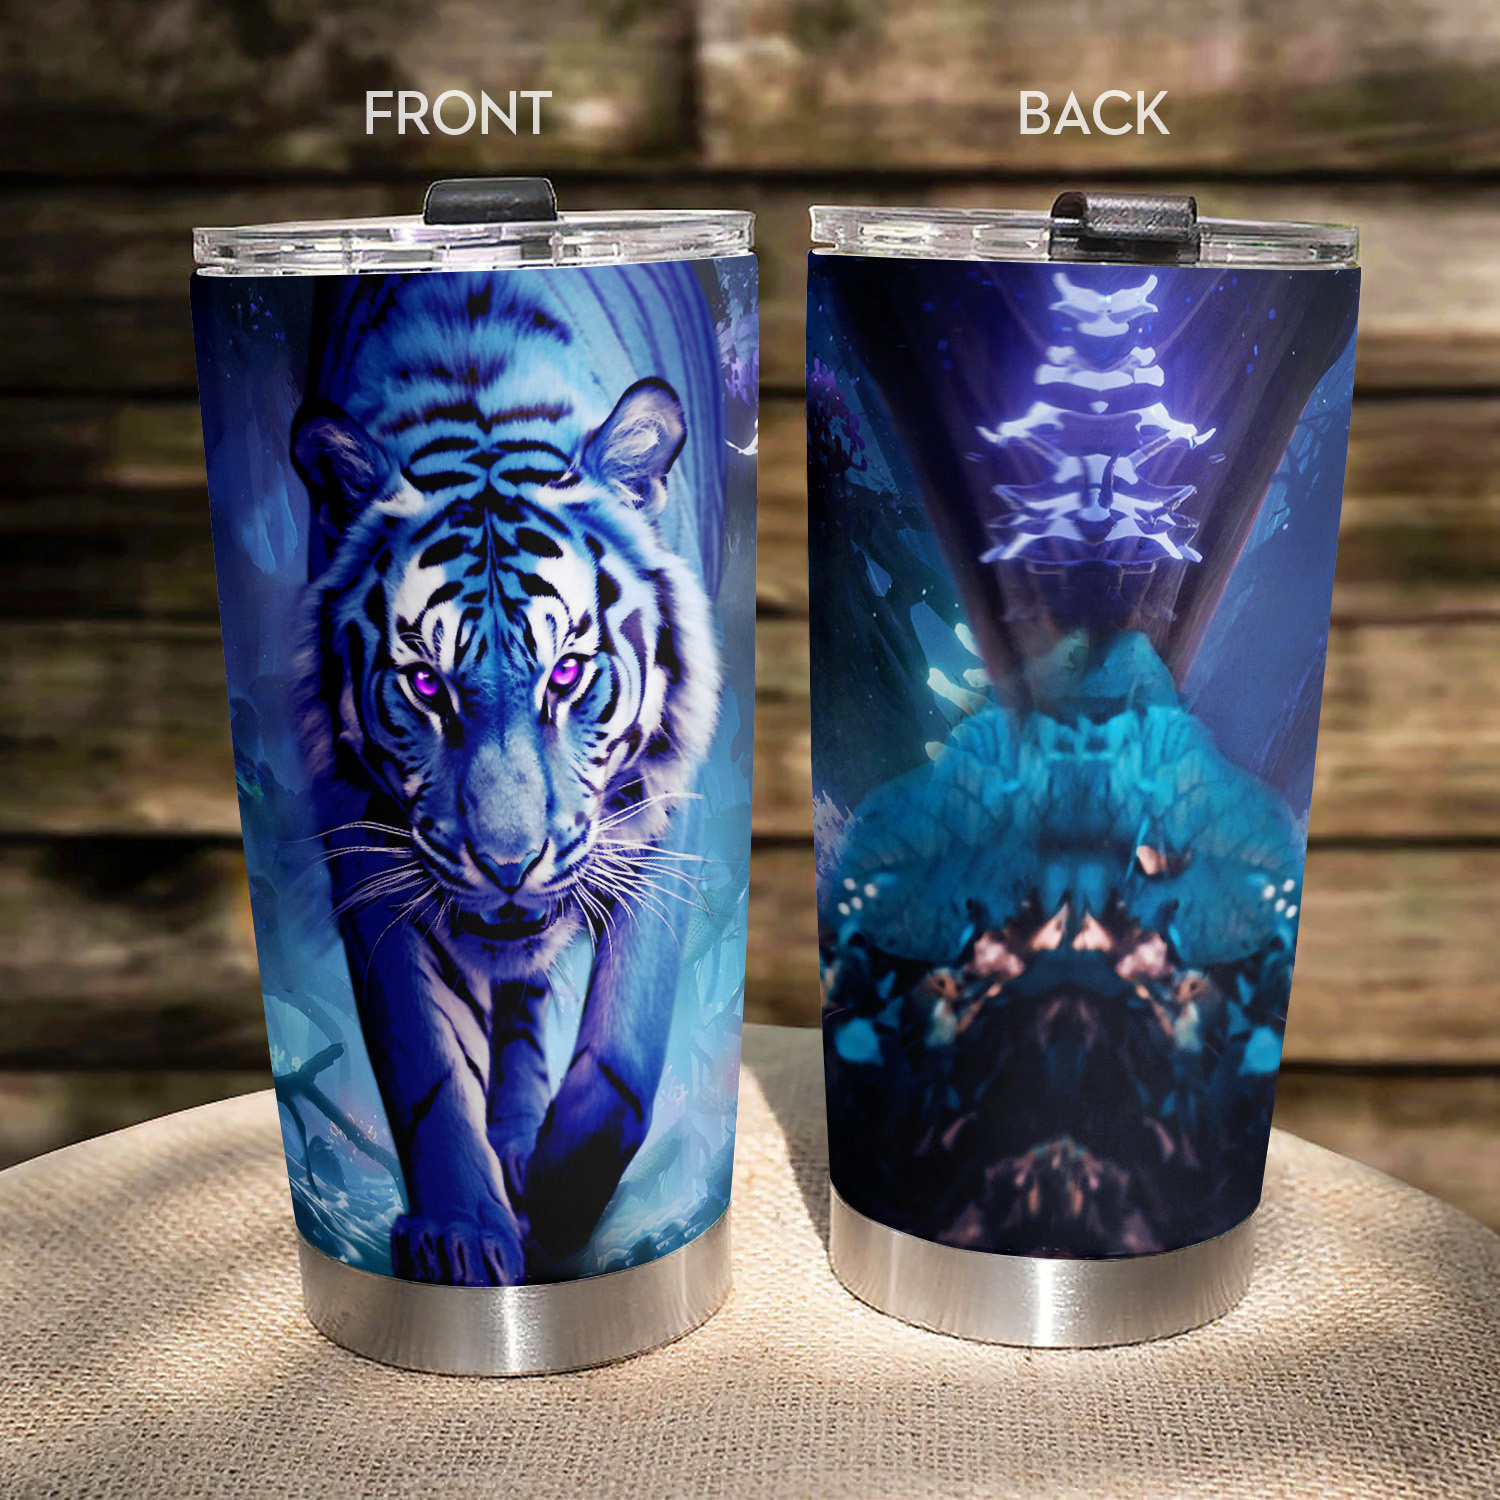 

1pc 20oz Tiger Tumbler Cup With Lid, Stainless Steel Double Wall Vacuum Insulated Travel Coffee Mug Tea Water Cups For Home Office